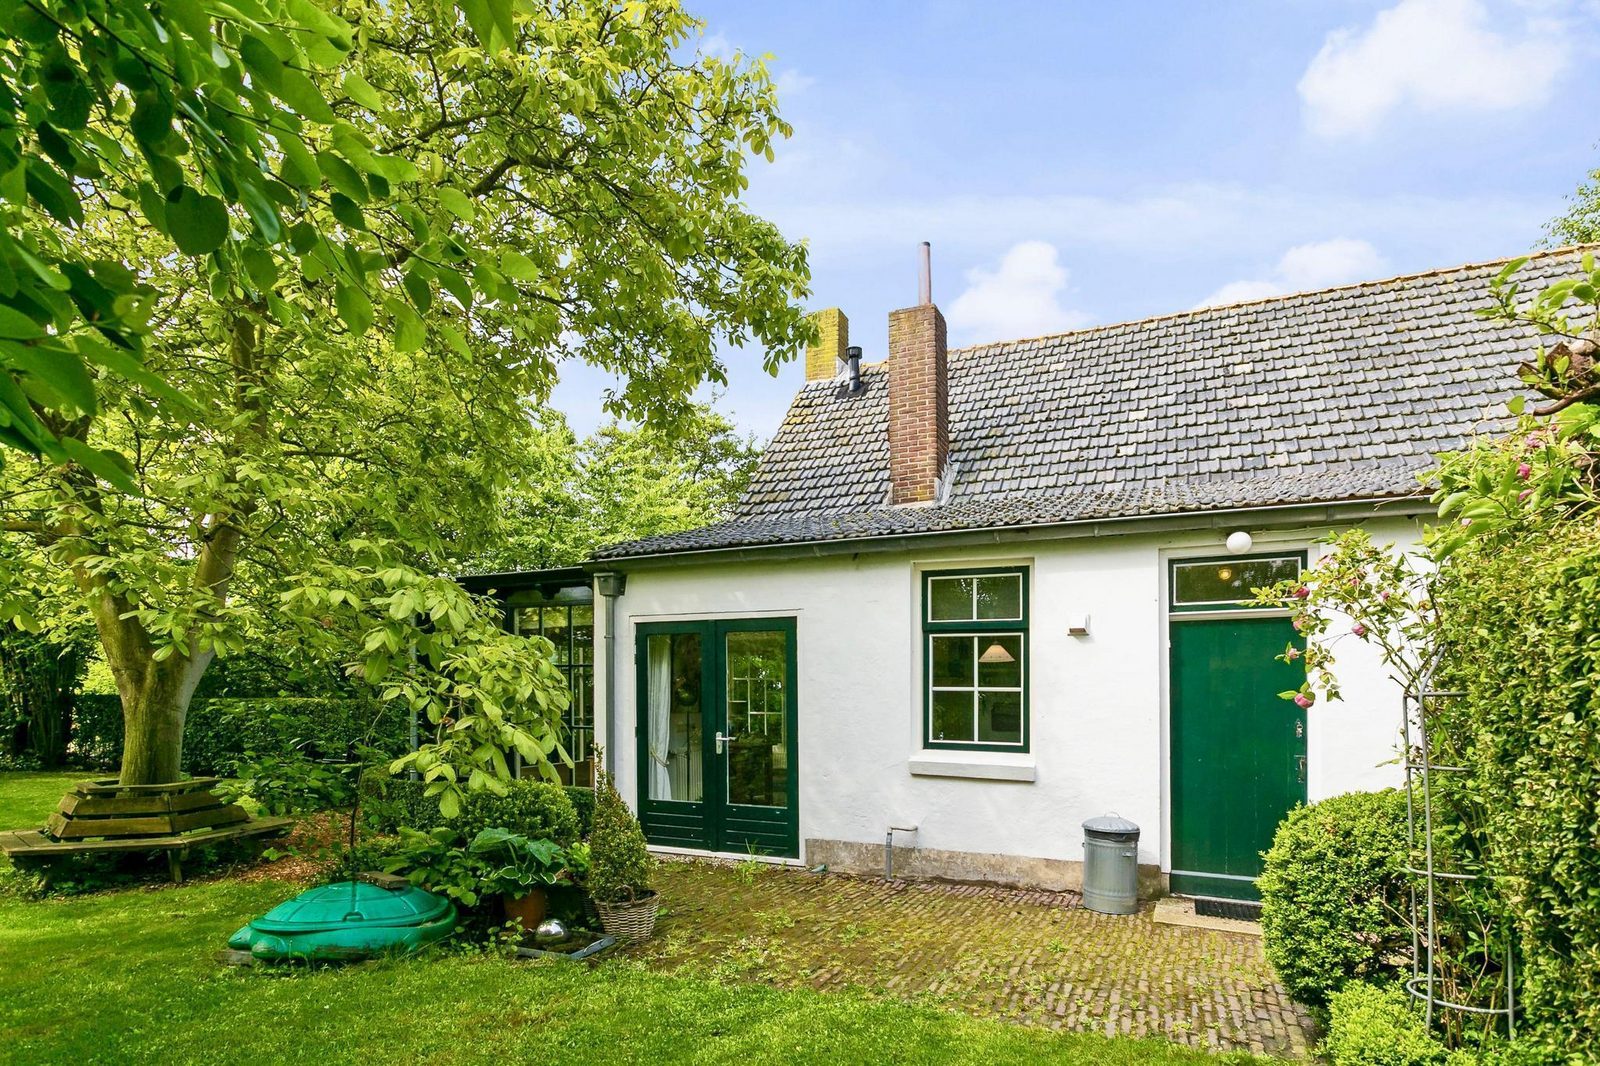 VZ2316 Detached holiday home in Oostkapelle